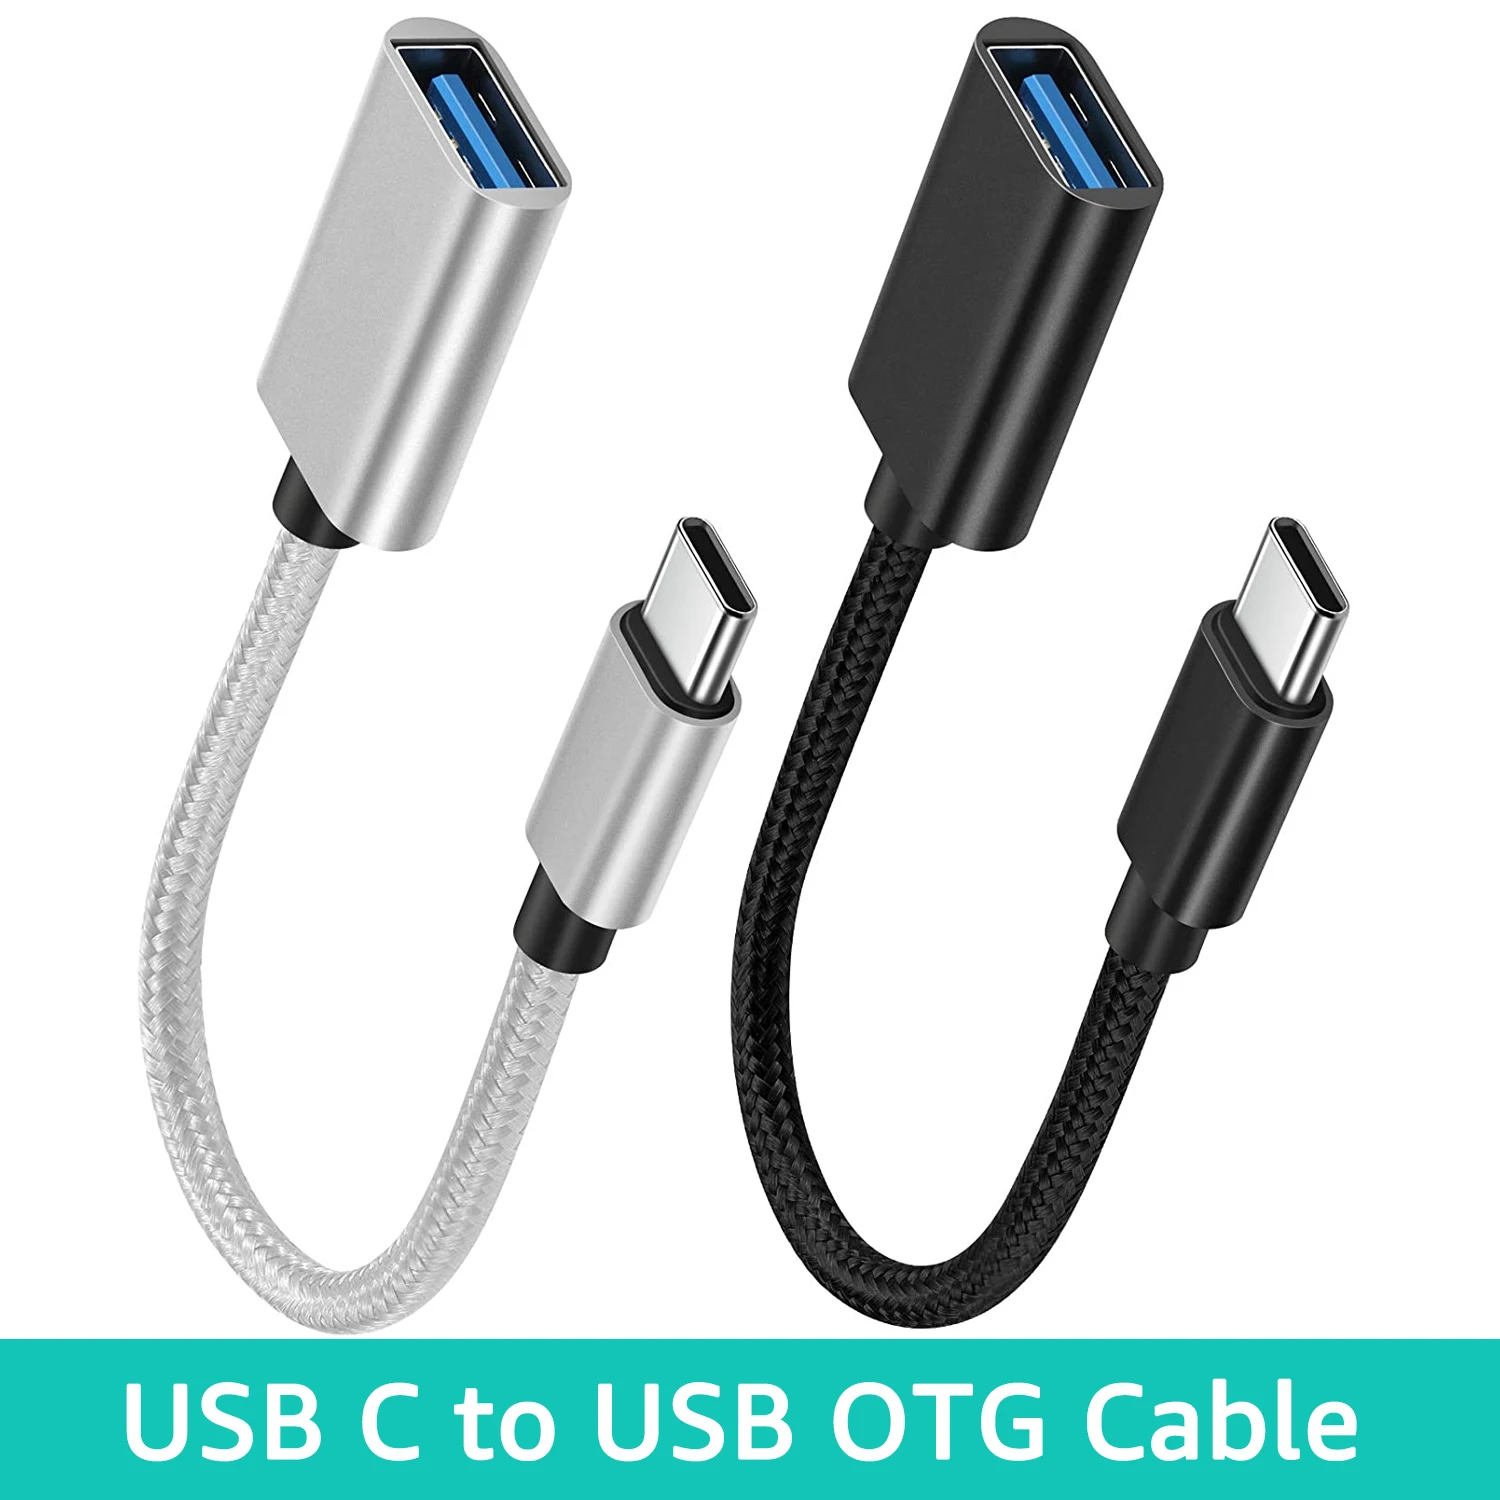 

OTG USB C To USB A Cable USB to Type C Adapter Connector for Xiaomi Samsung S20 Huawei OTG Data Cable Converter for MacBook Pro